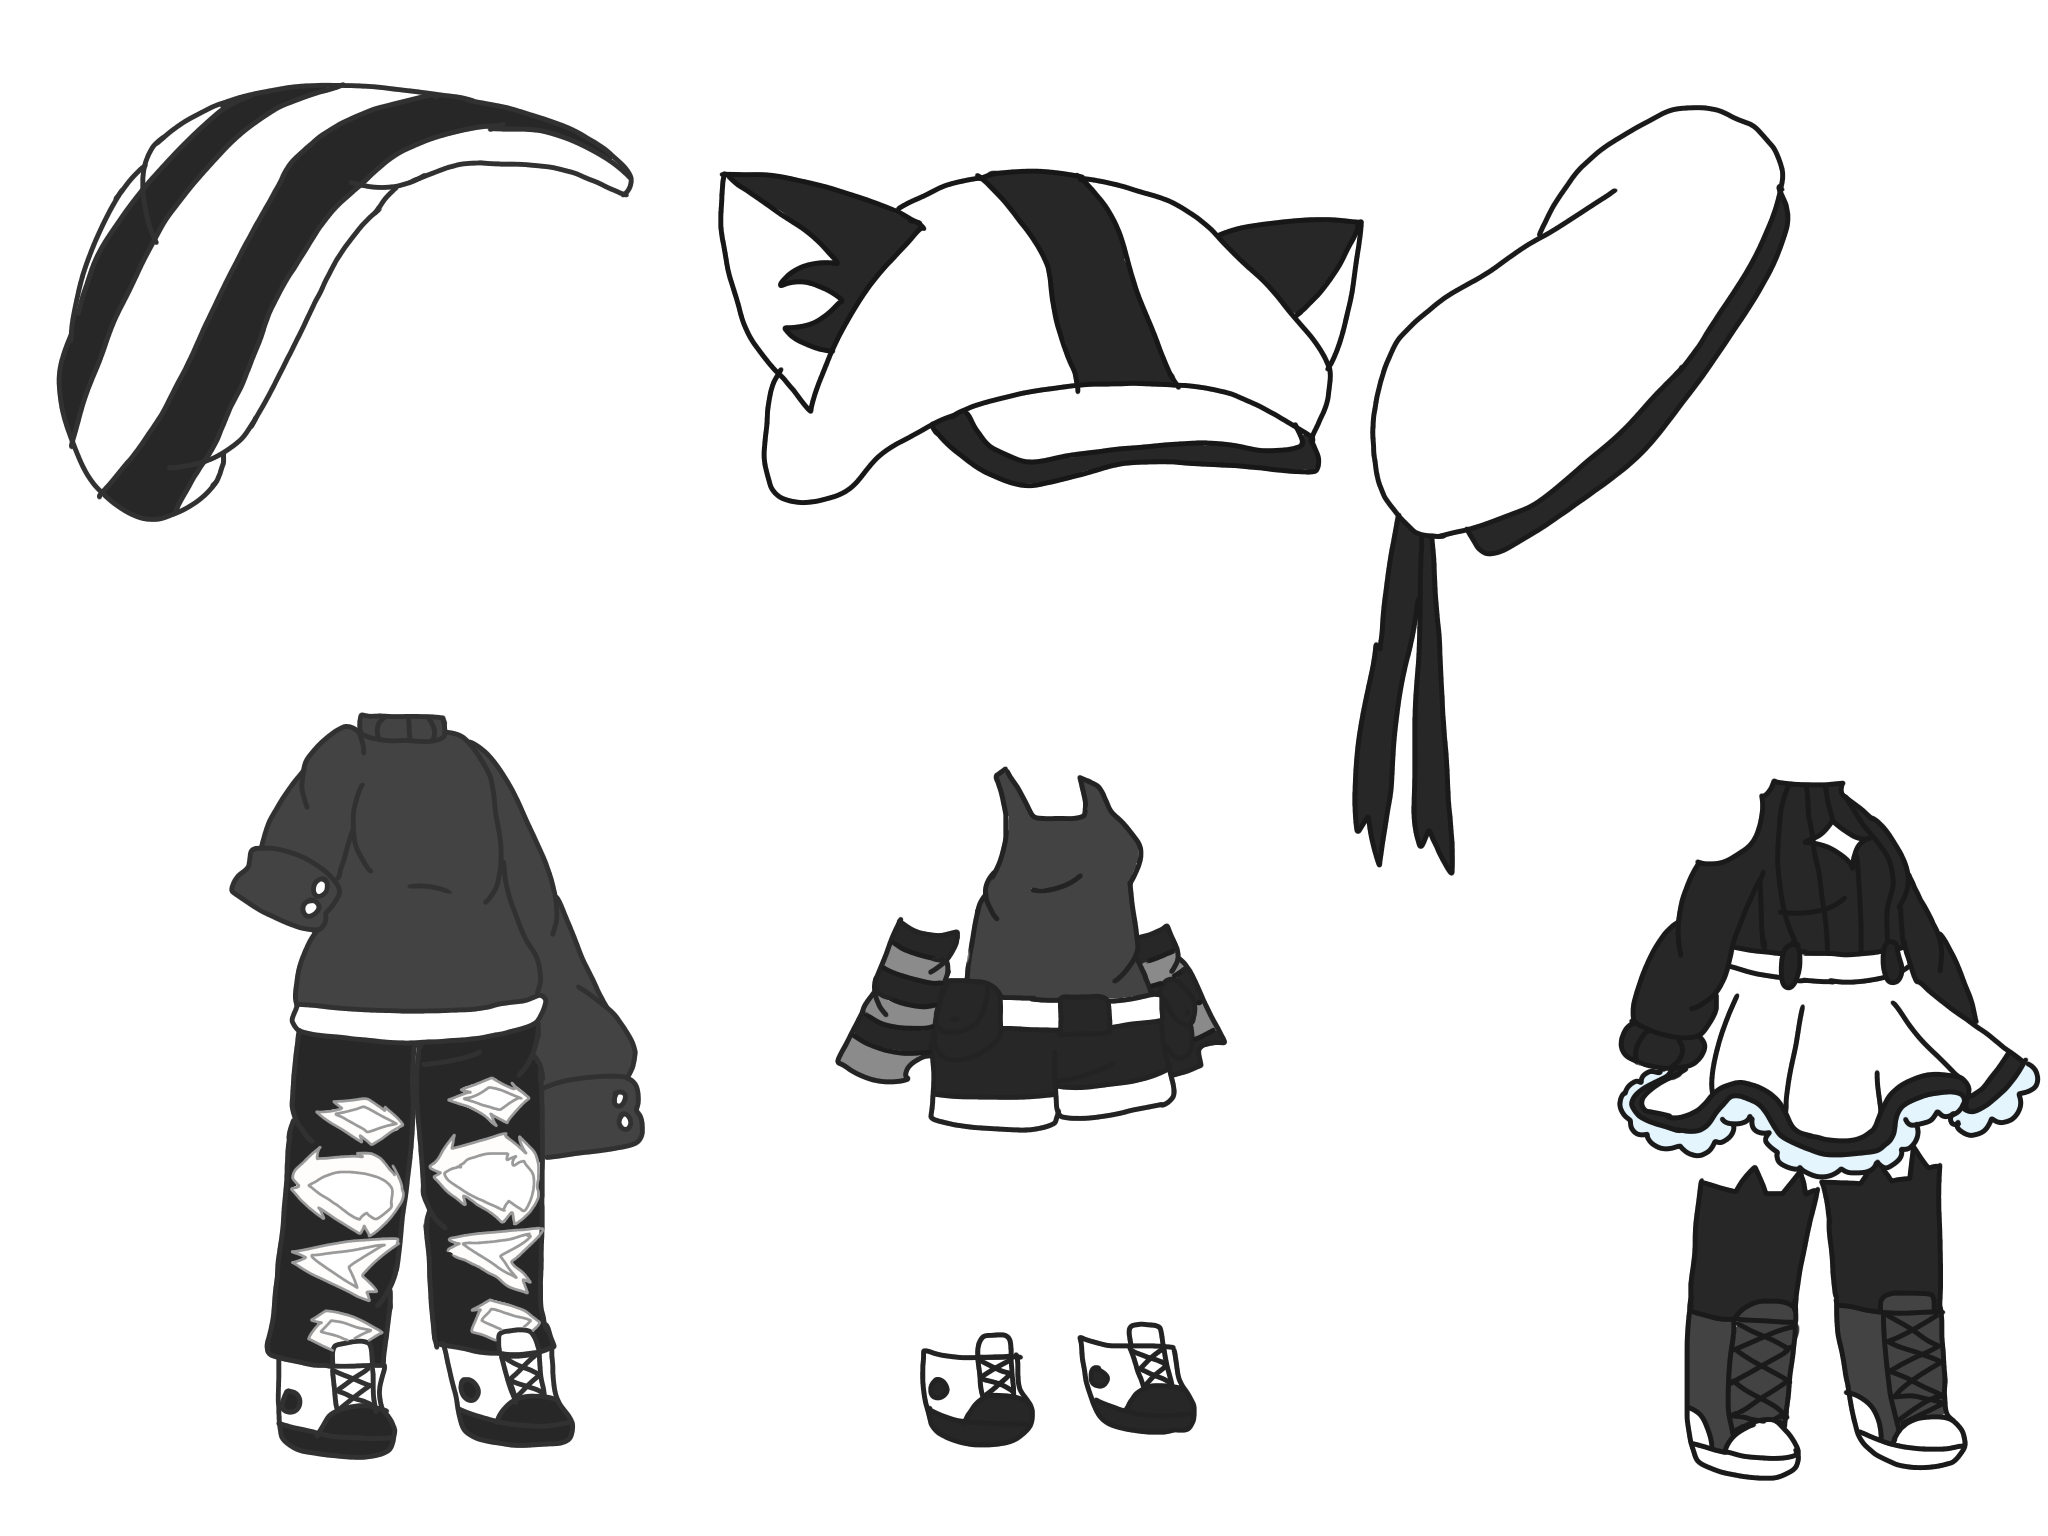 This visual is about pickyourluckyoutfit gacha gachalife 3 outfits freetoed...